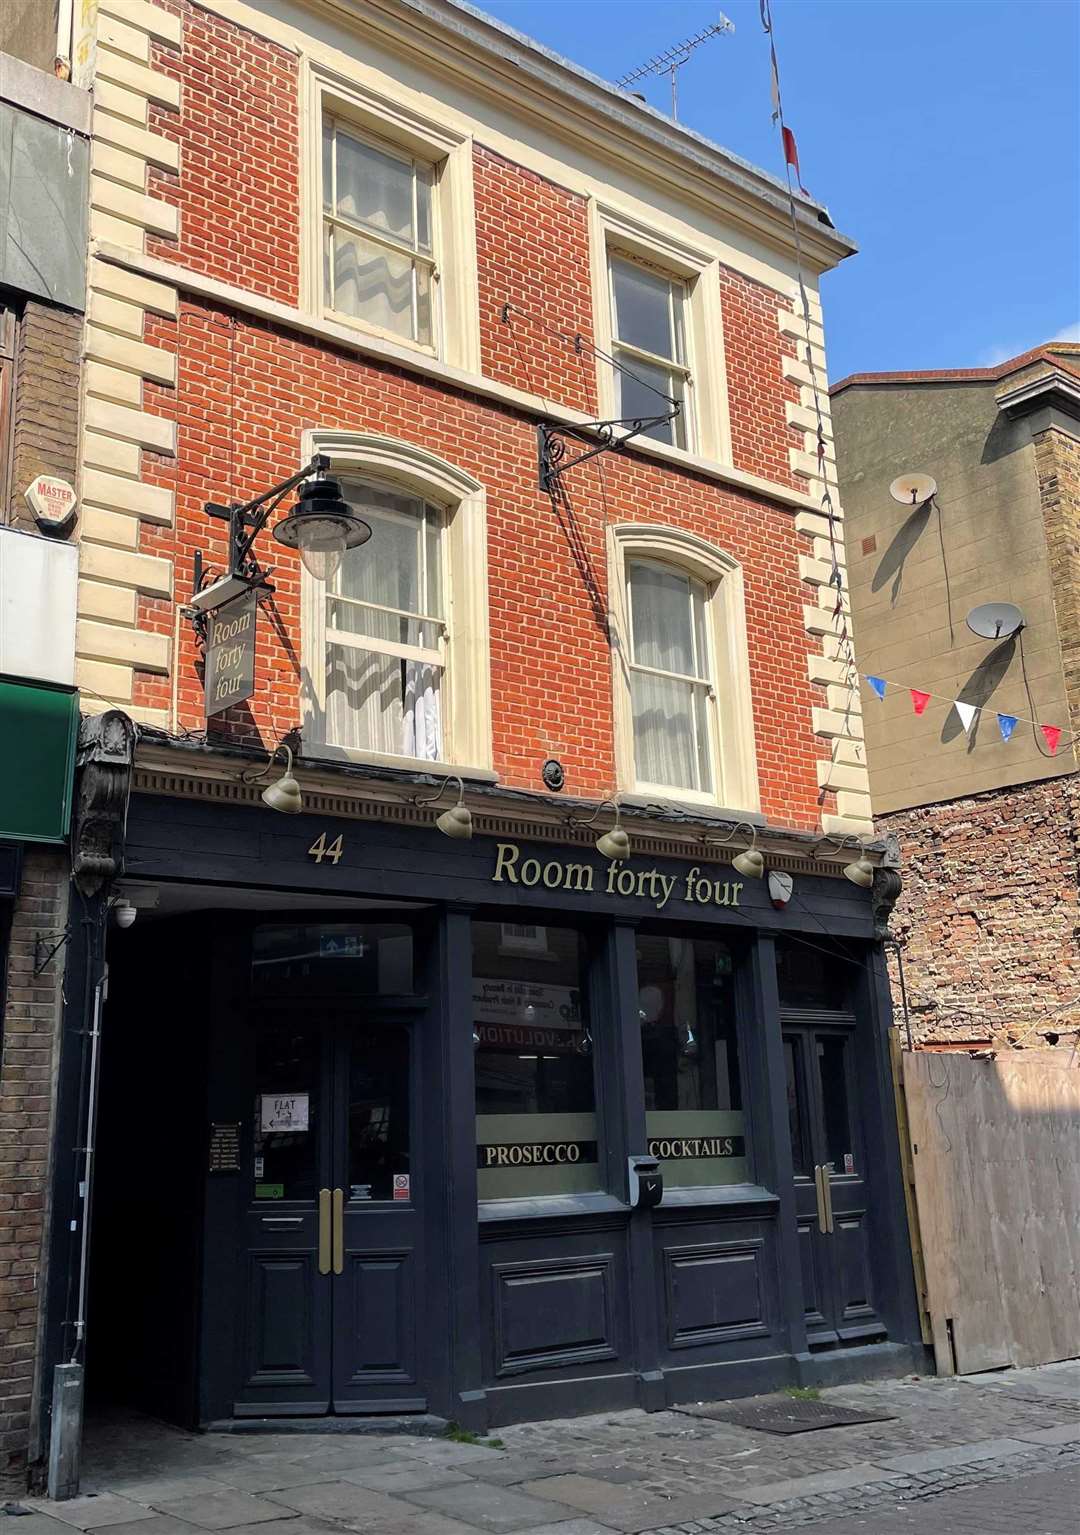 Room Forty Four in High Street, Gravesend